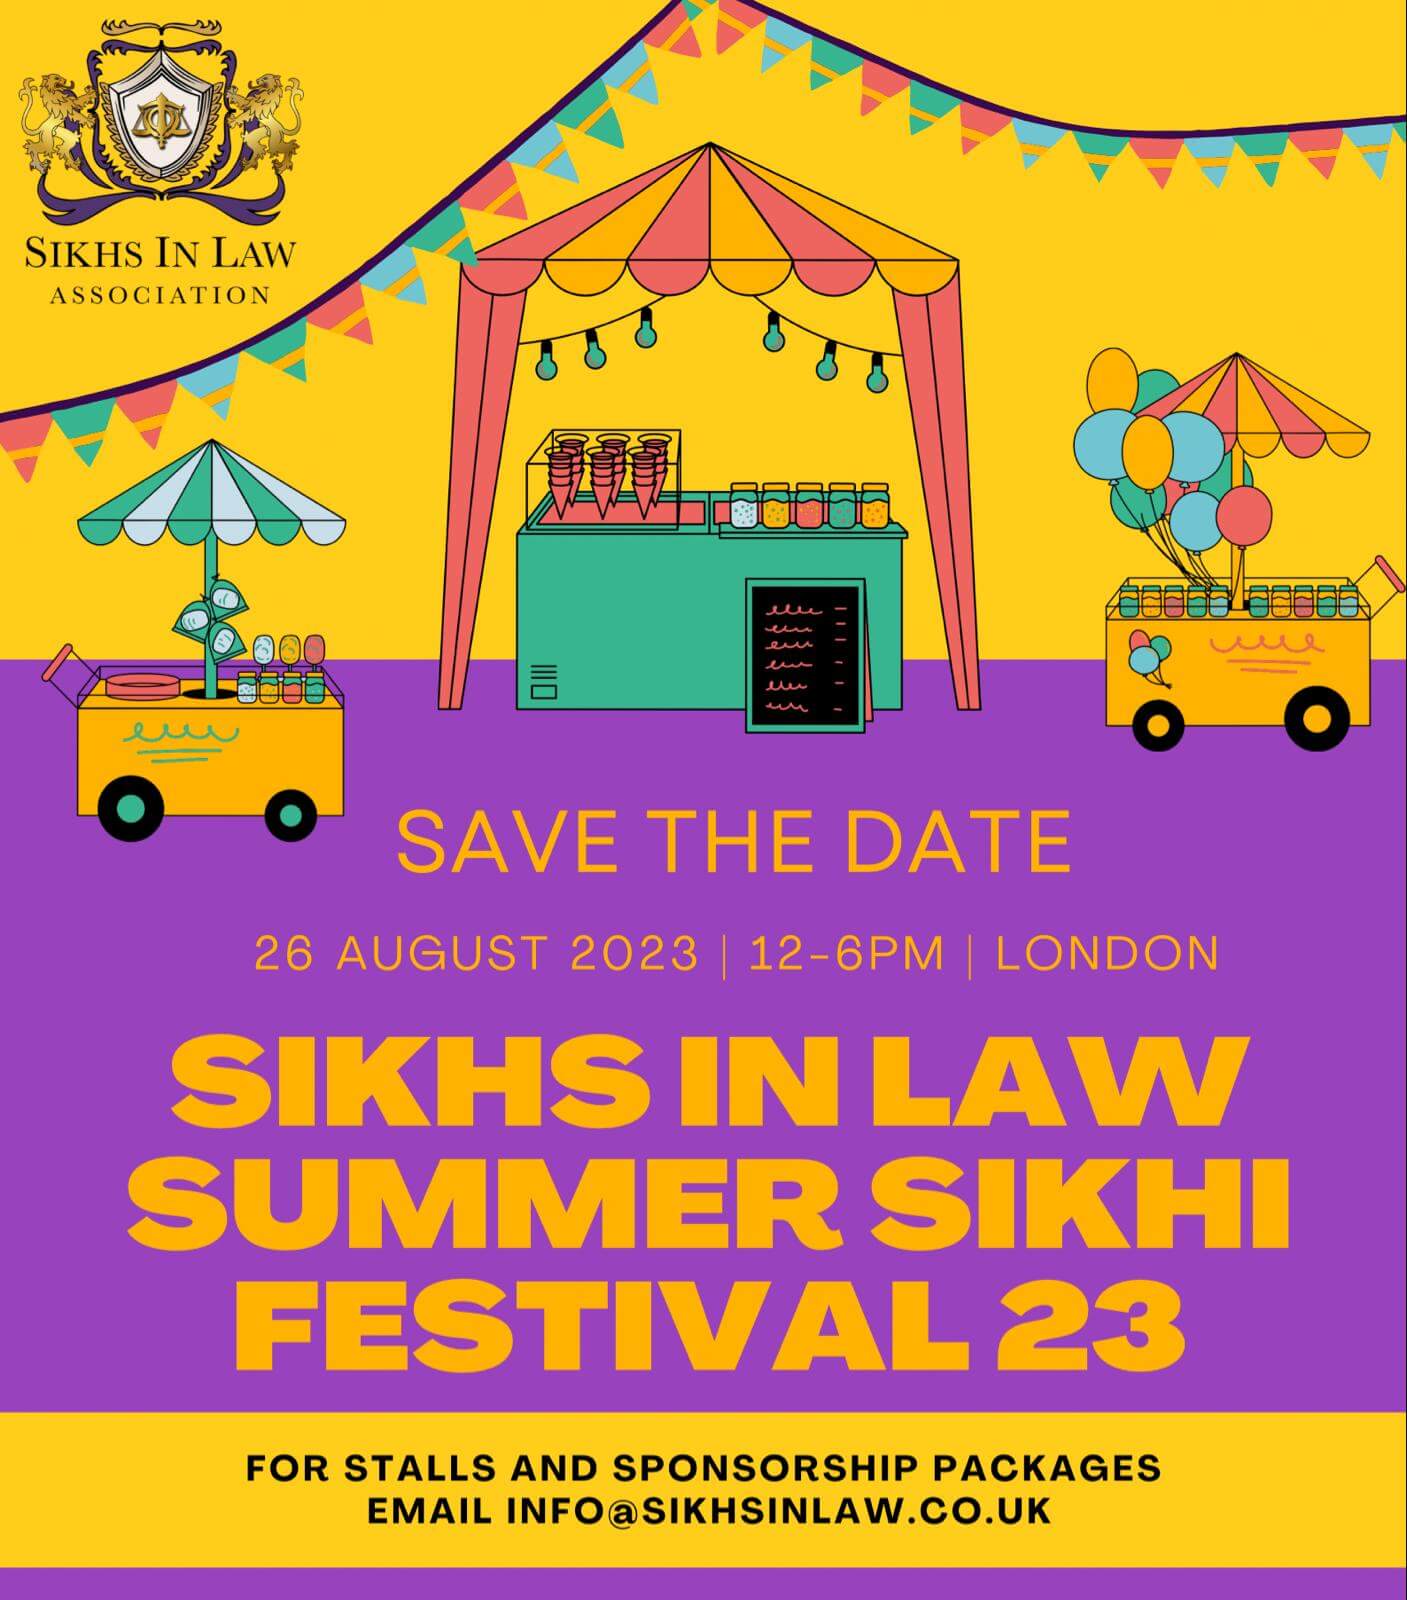 Sikhs in Law